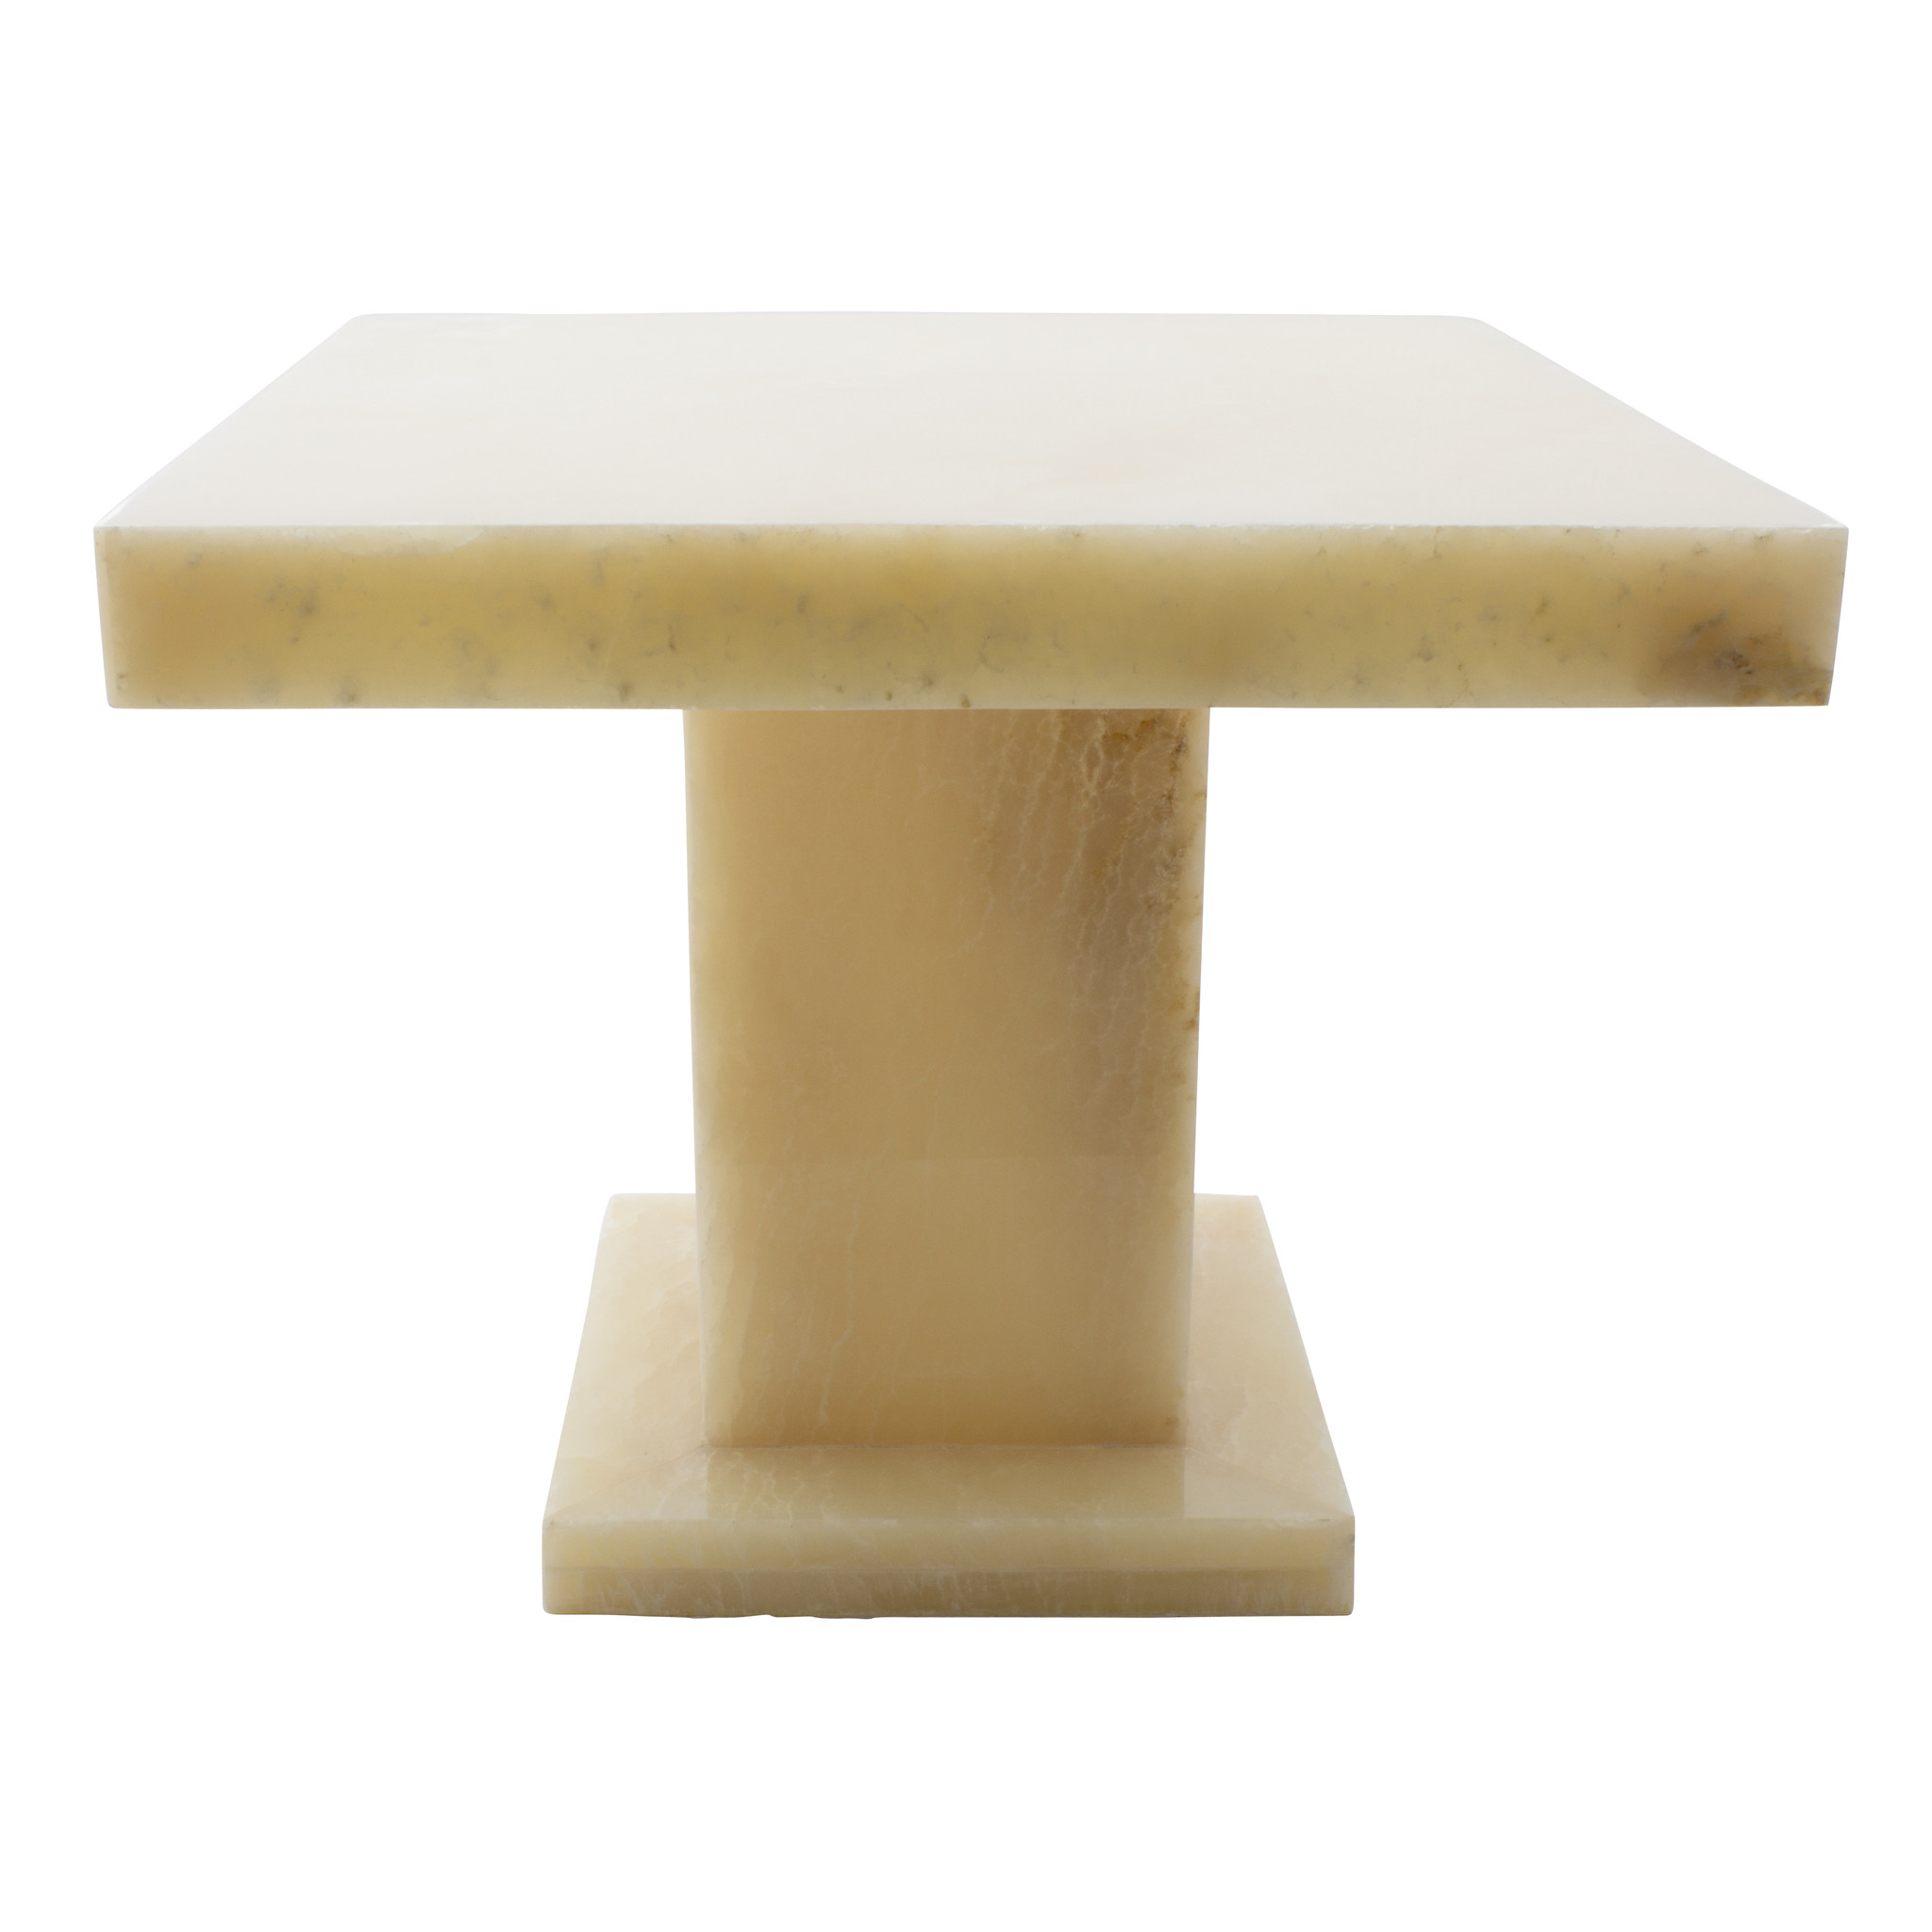 Indomarmer Onyx Side table Square 50x50x40 cm